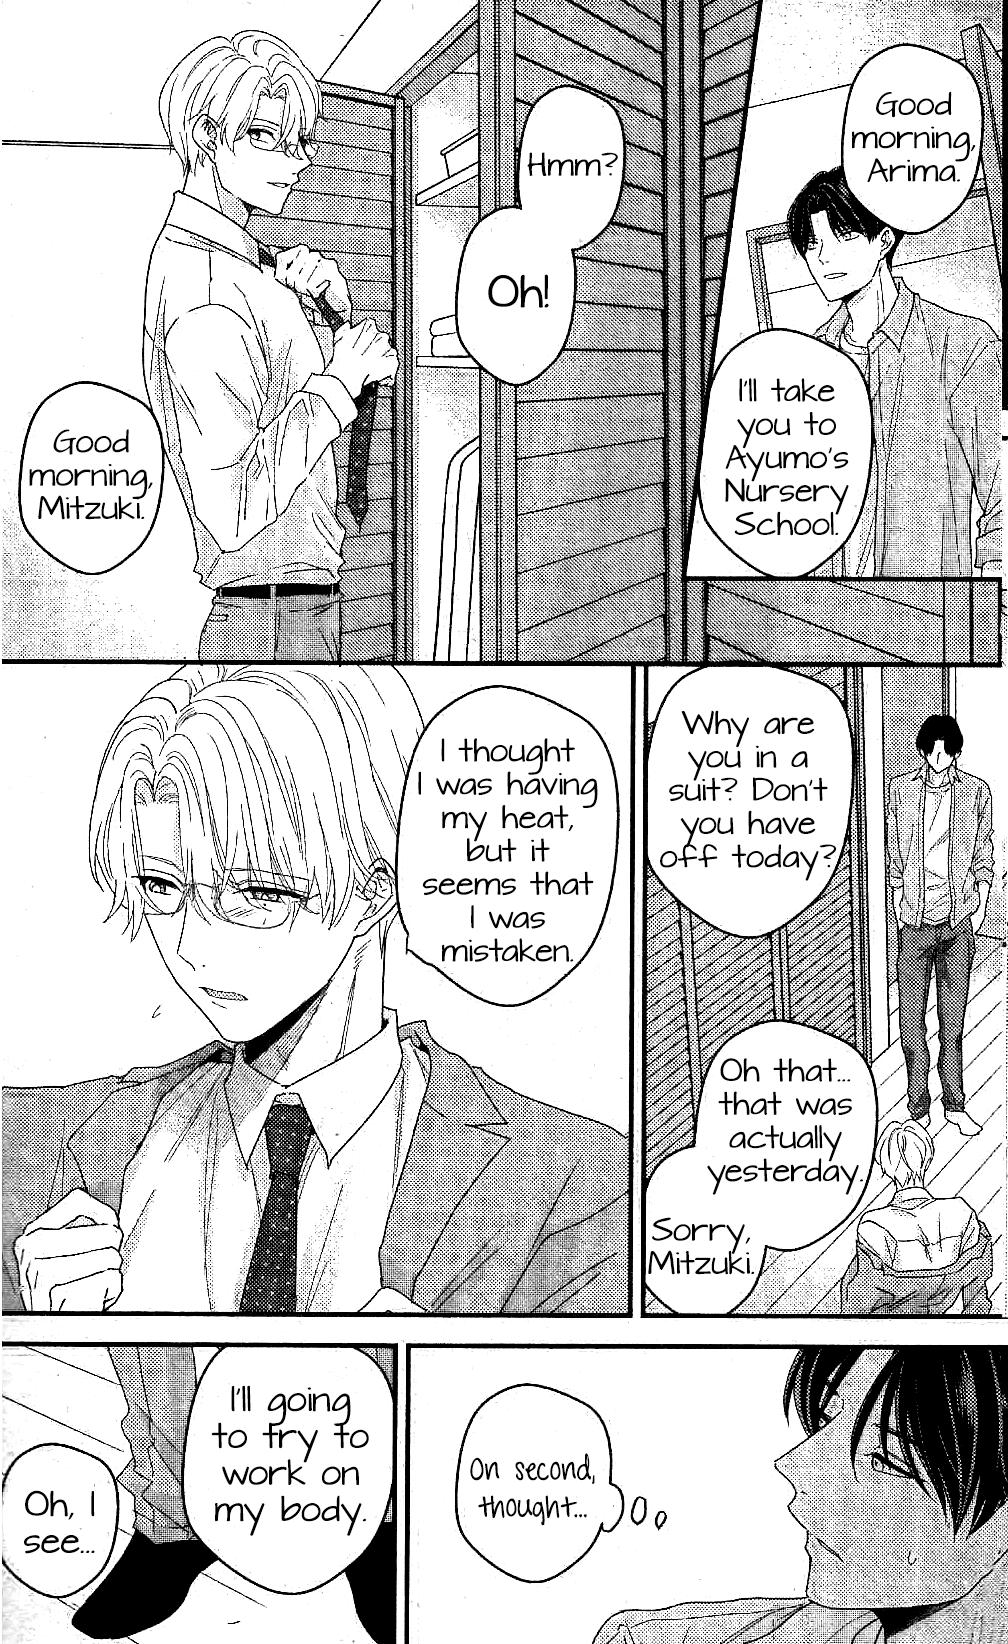 Arima Wants To Be An Omega - Page 3